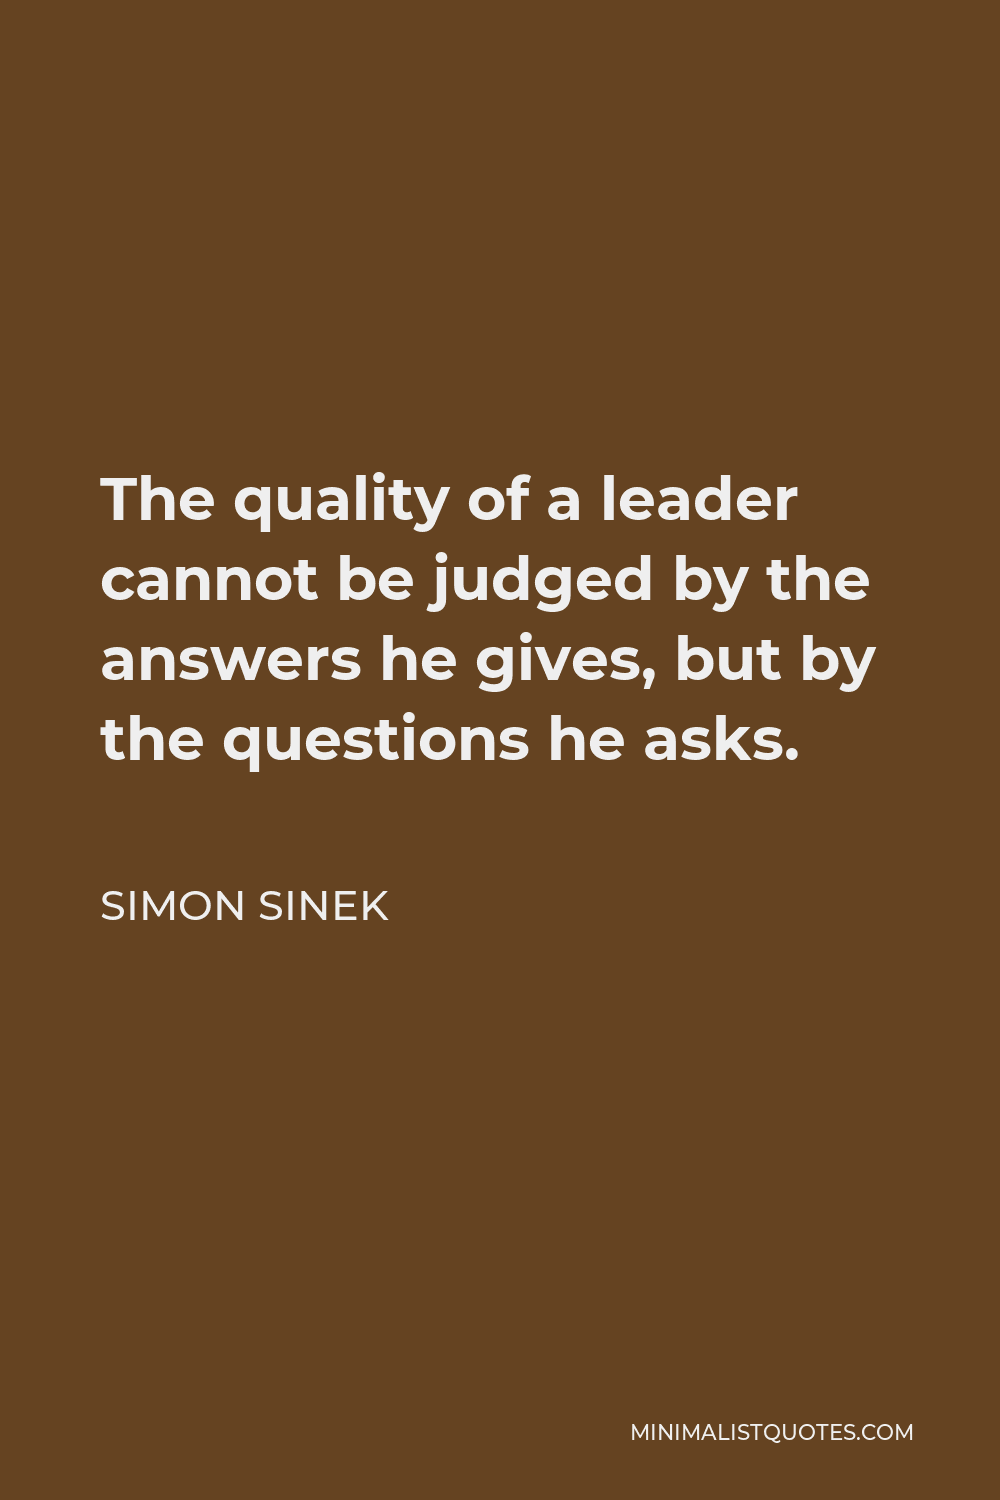 Simon Sinek Quote - The quality of a leader cannot be judged by the answers he gives, but by the questions he asks.